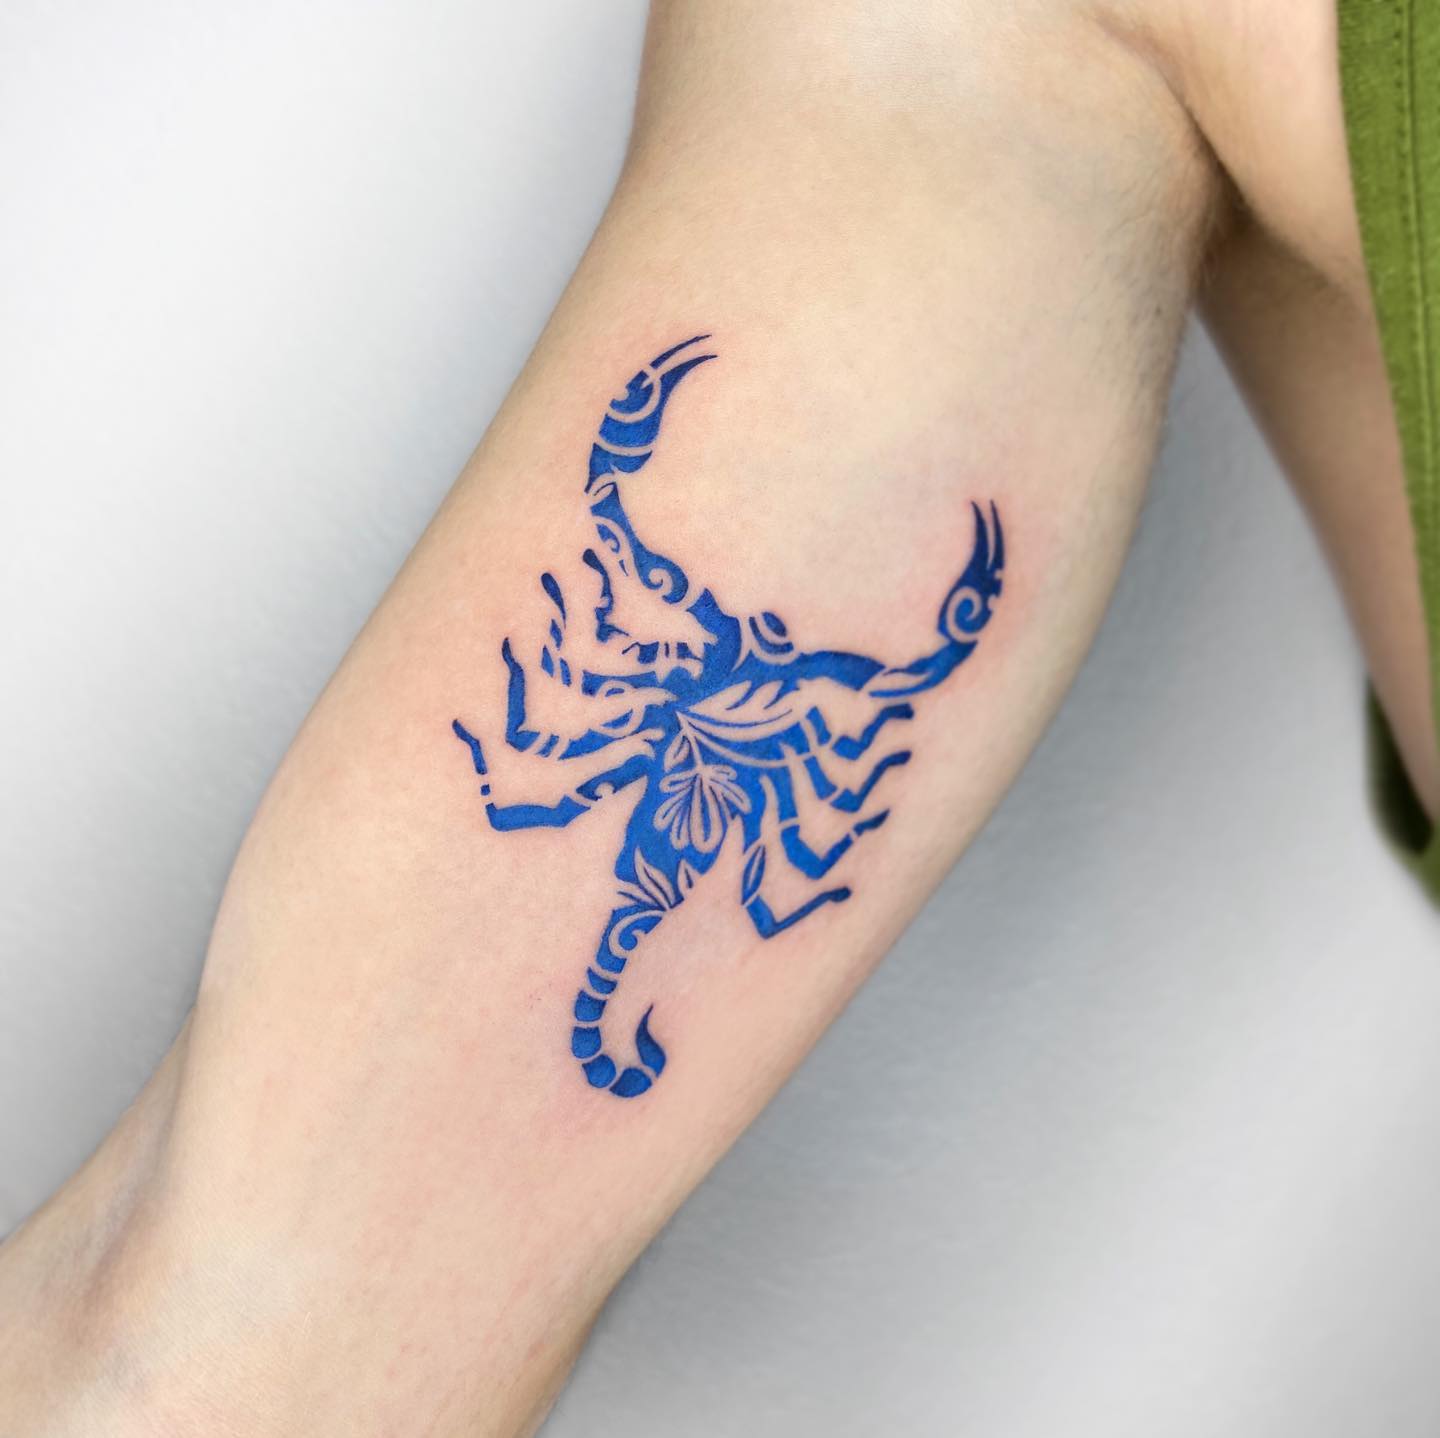 50 Tribal Scorpion Tattoo Designs For Men - Manly Ink Ideas